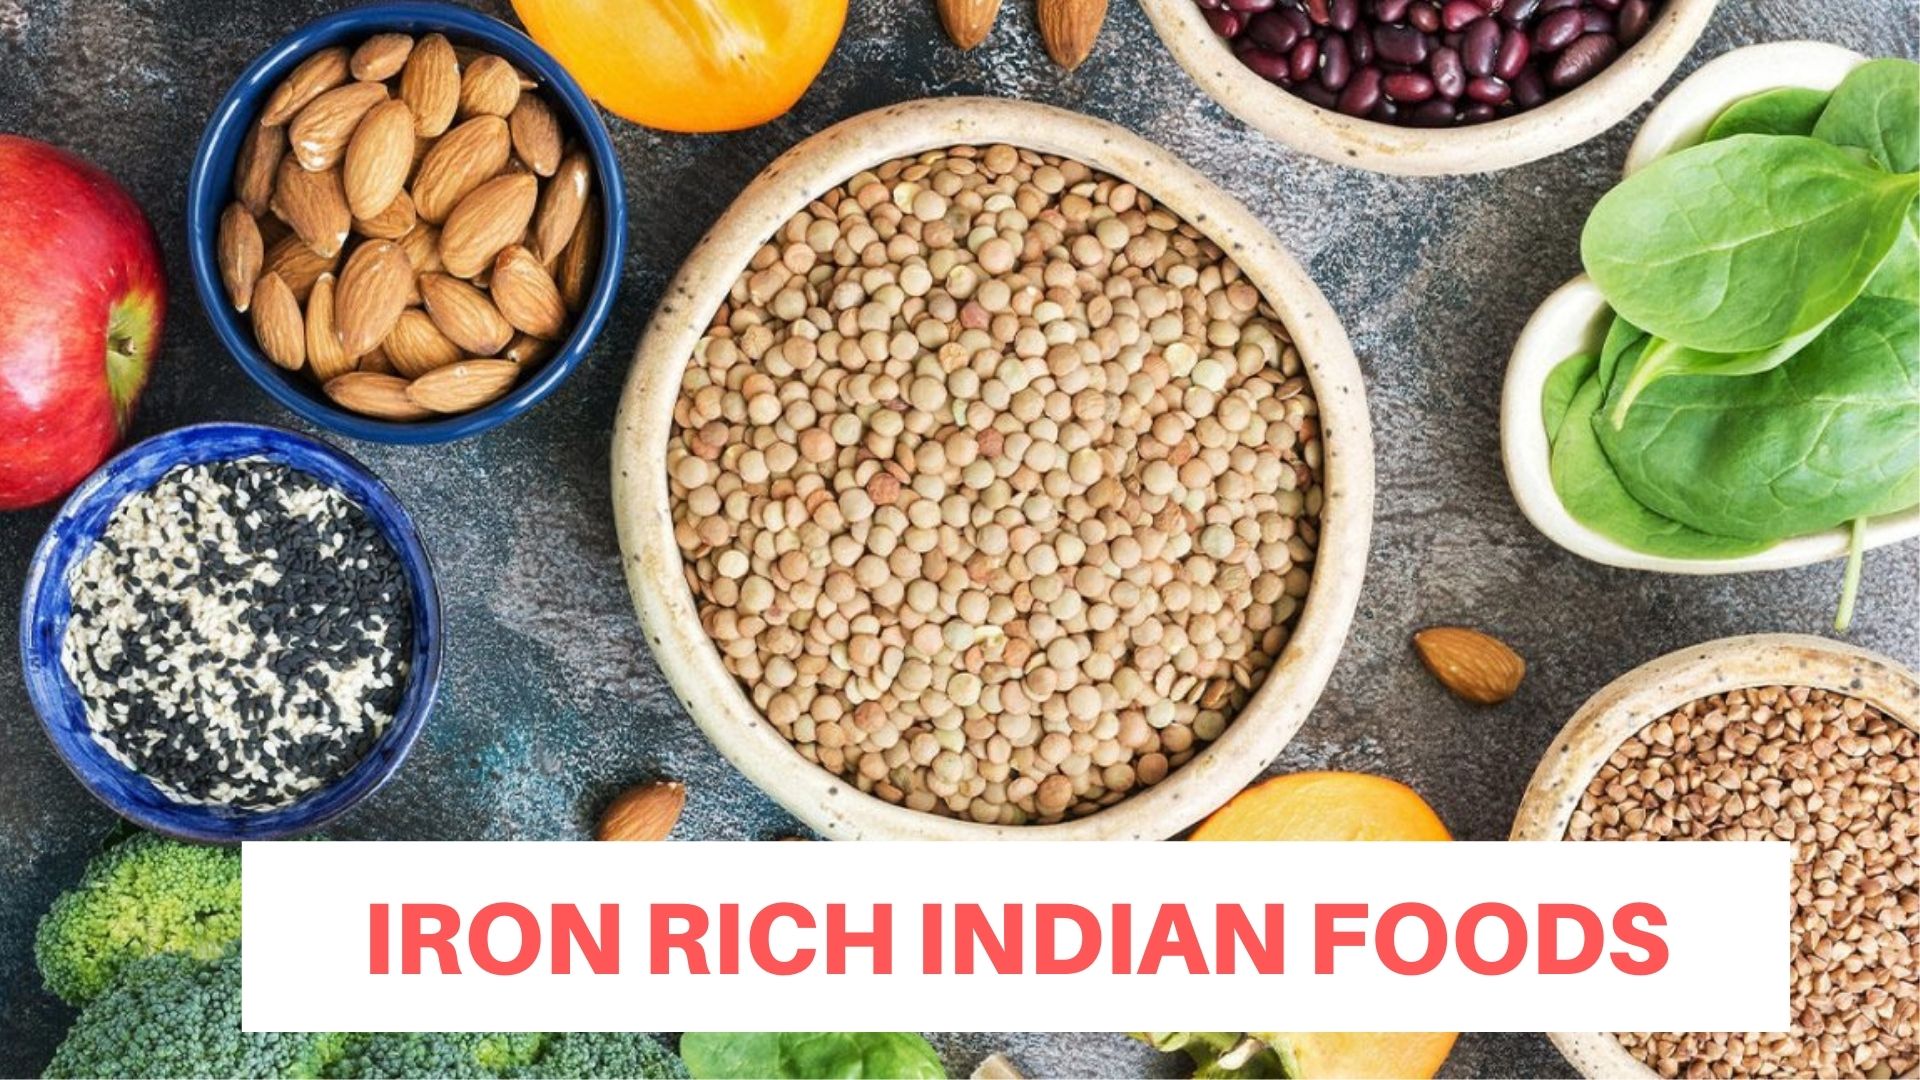 List of Iron Rich Indian Foods